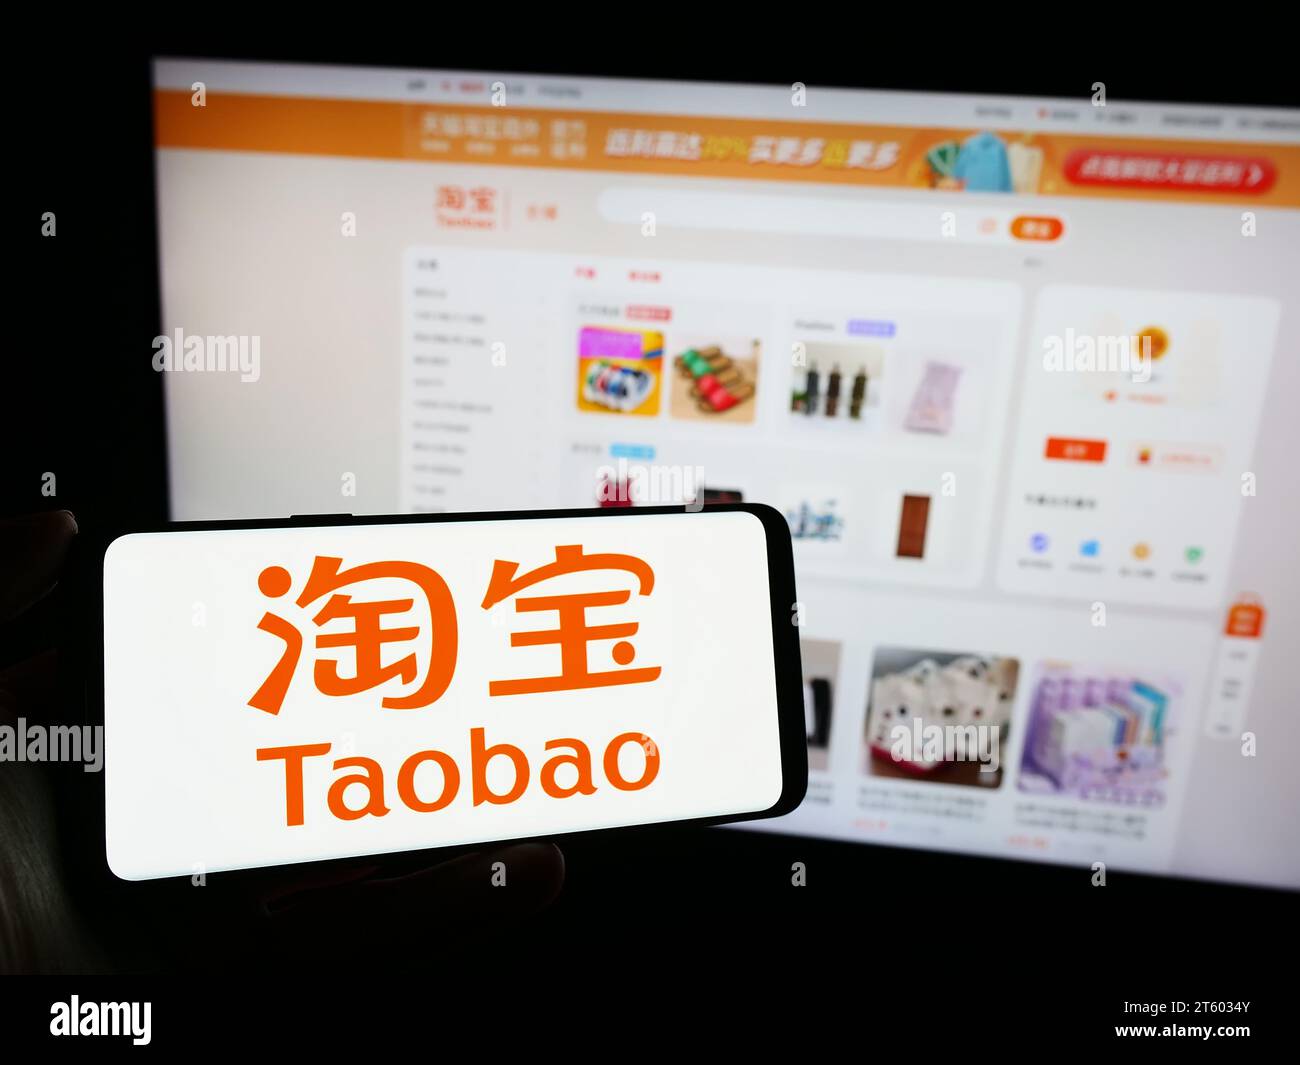 Person holding mobile phone with logo of Chinese online shop Taobao (Alibaba Group) in front of company web page. Focus on phone display. Stock Photo